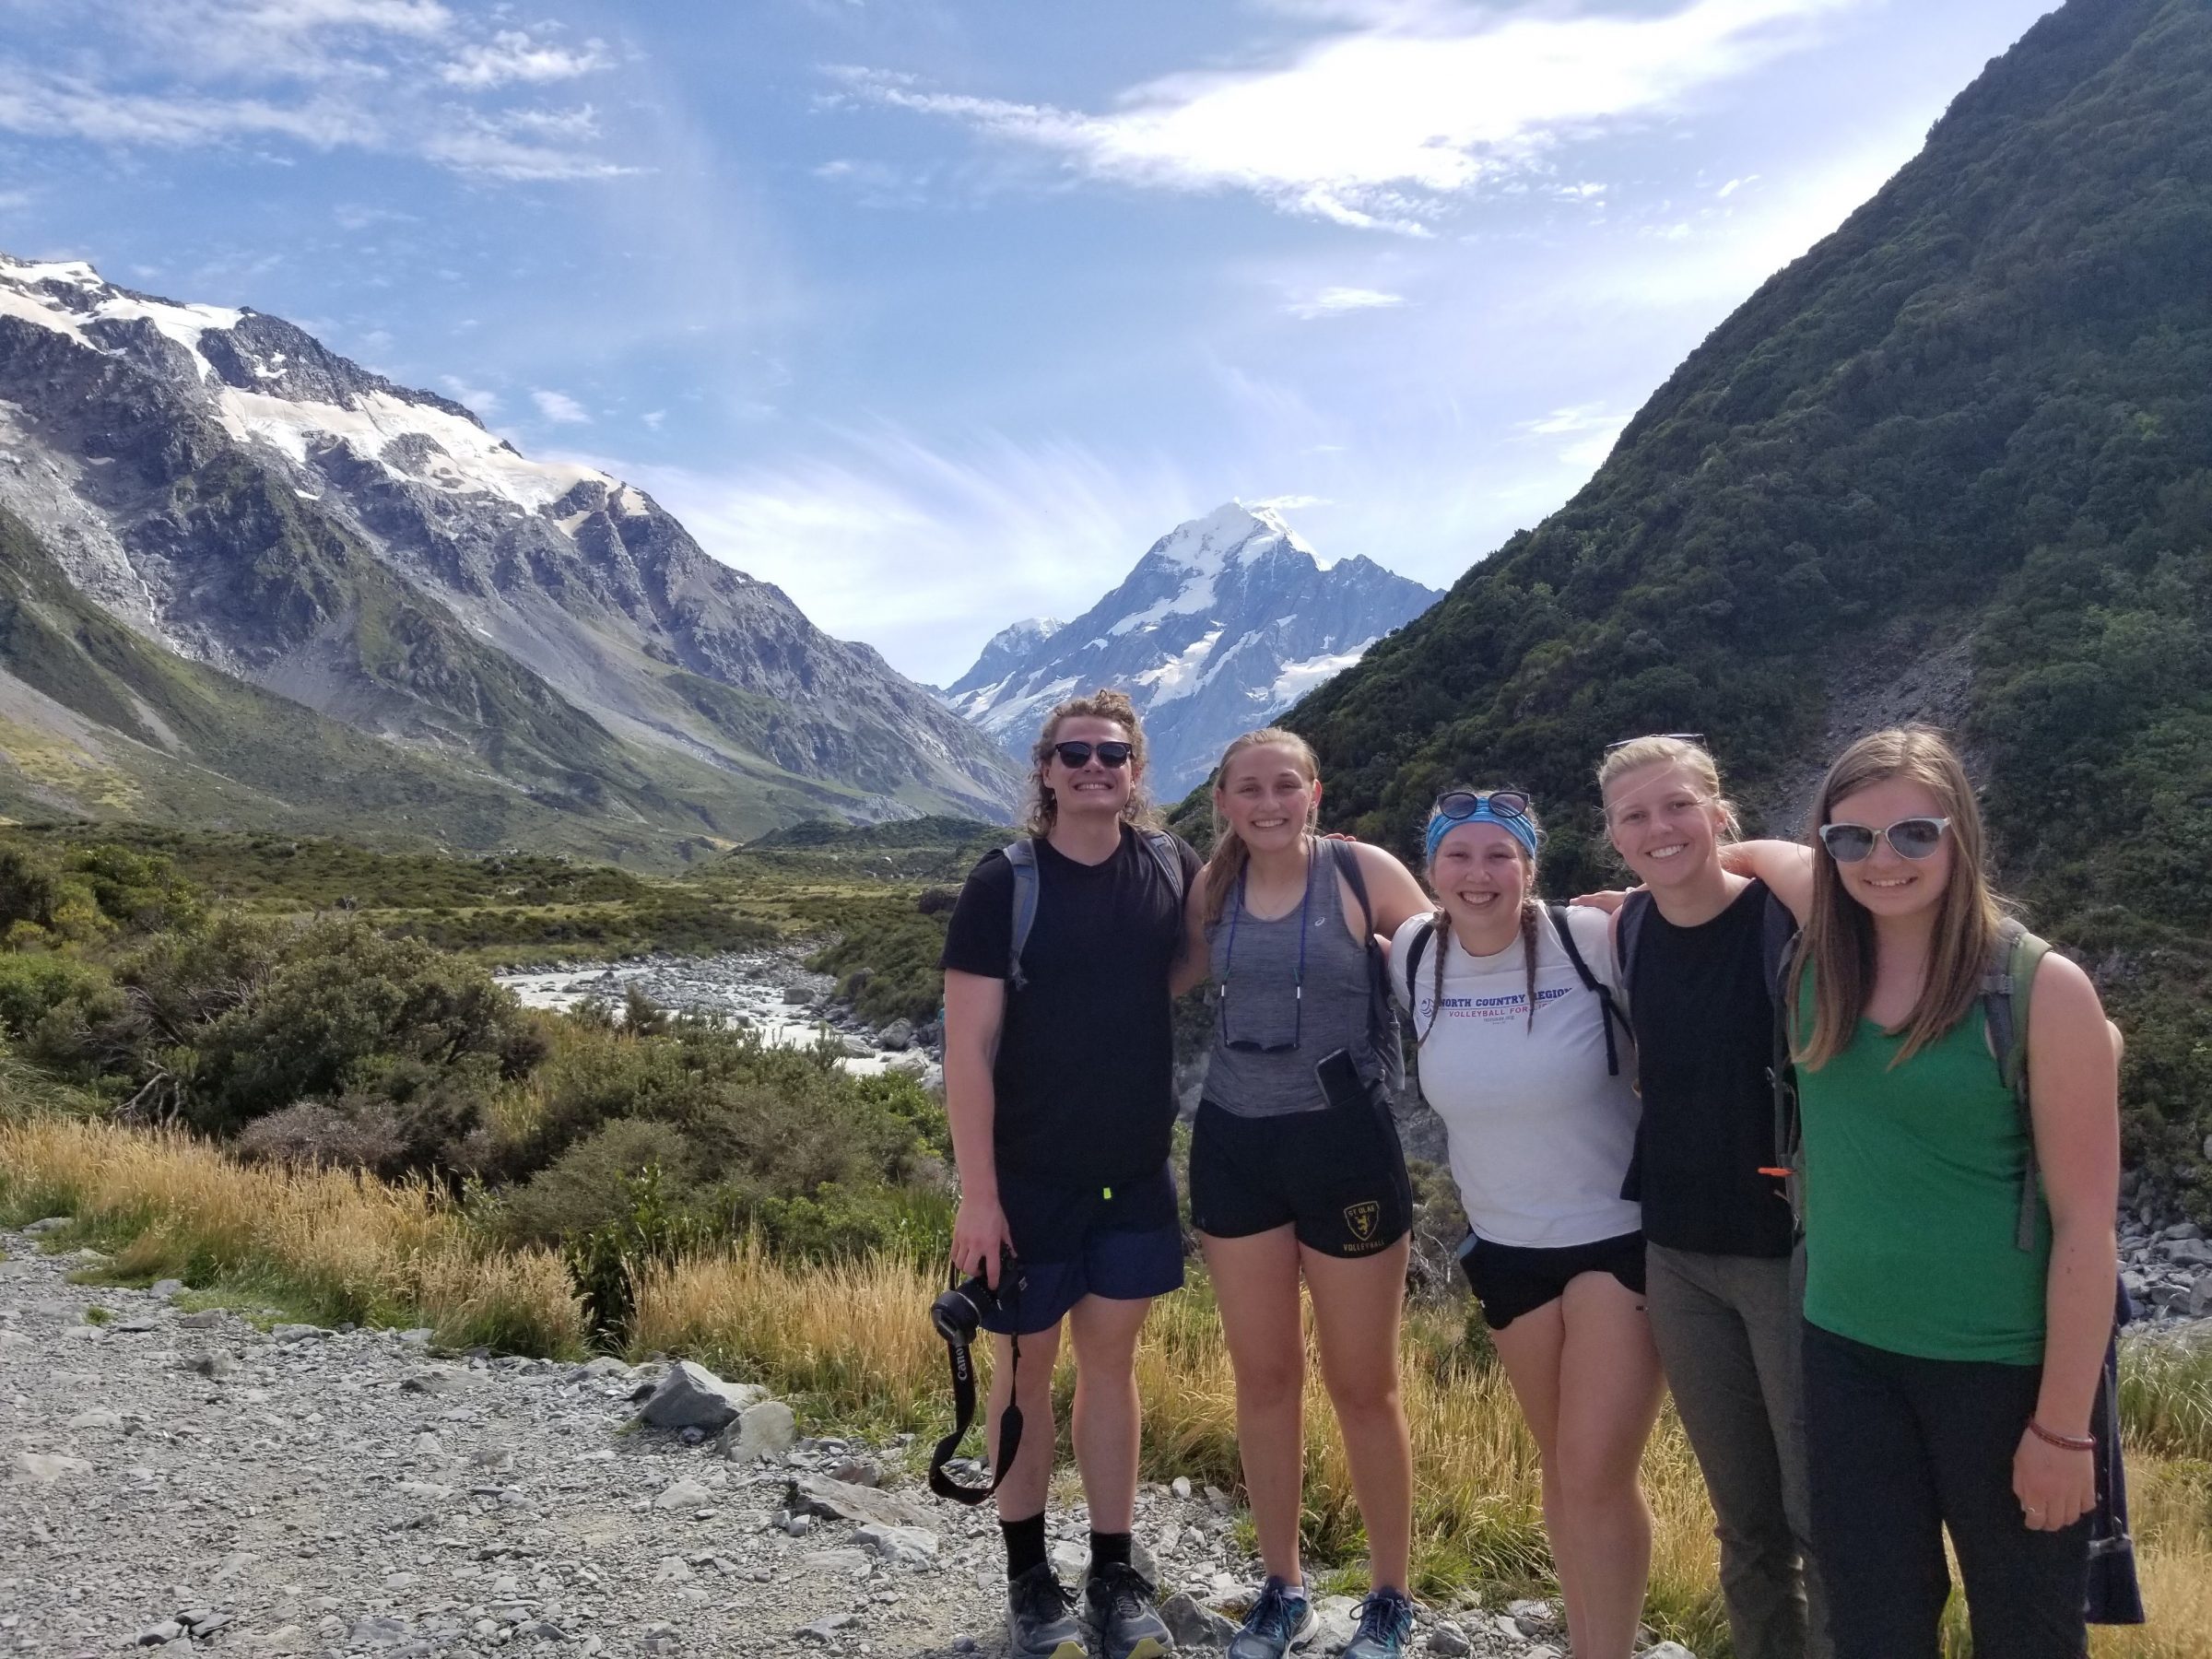 Group photo on a hike at Mount Cook Aoraki National Park